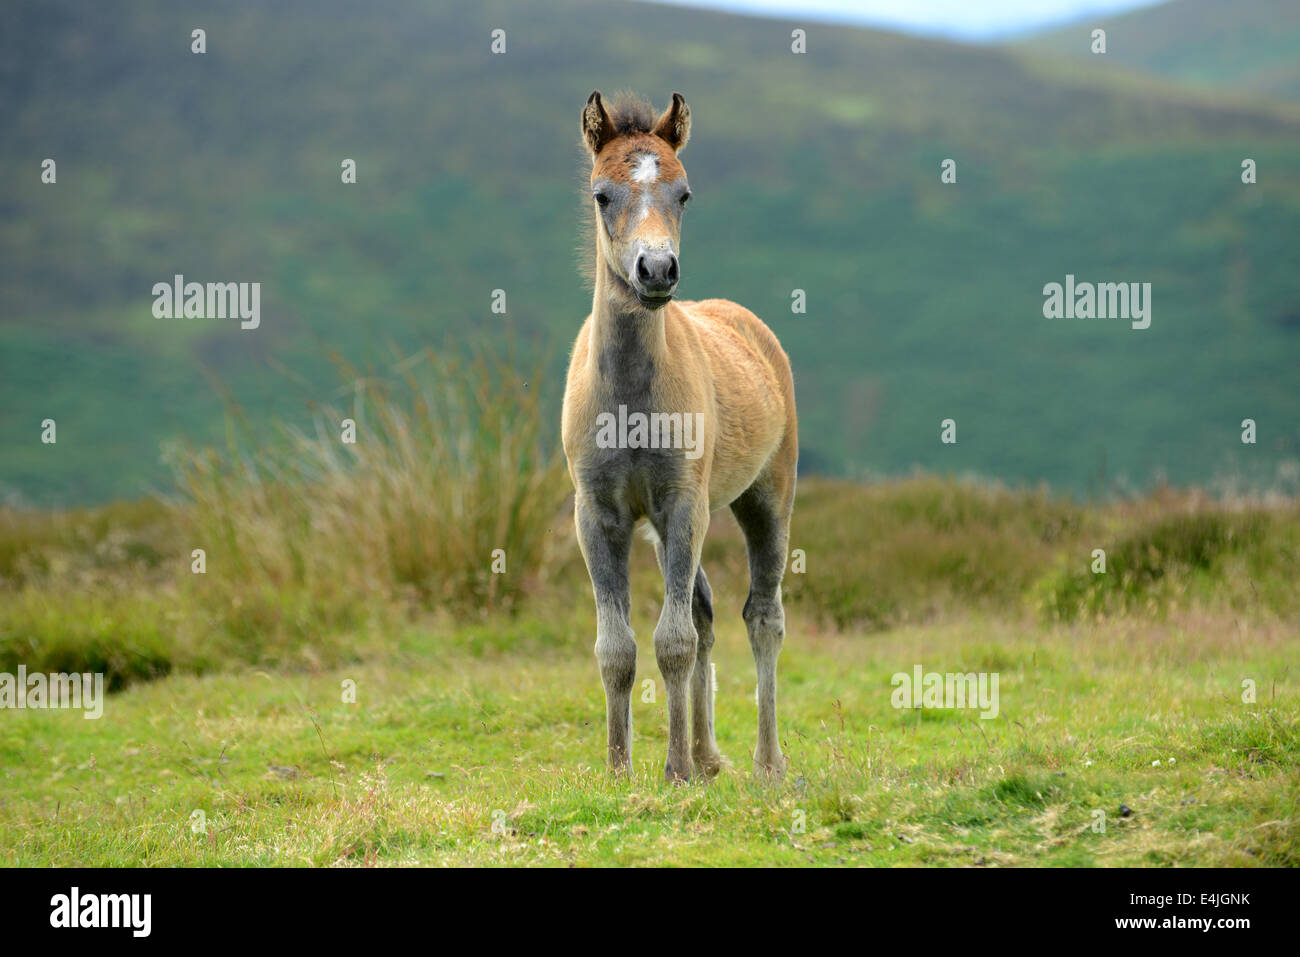 Long Mynd Shropshire Hills Uk 13th July 2014.  Born to be wild! Two week old wild pony foal stretching his legs on the hills of Shropshire. Credit:  David Bagnall/Alamy Live News Stock Photo